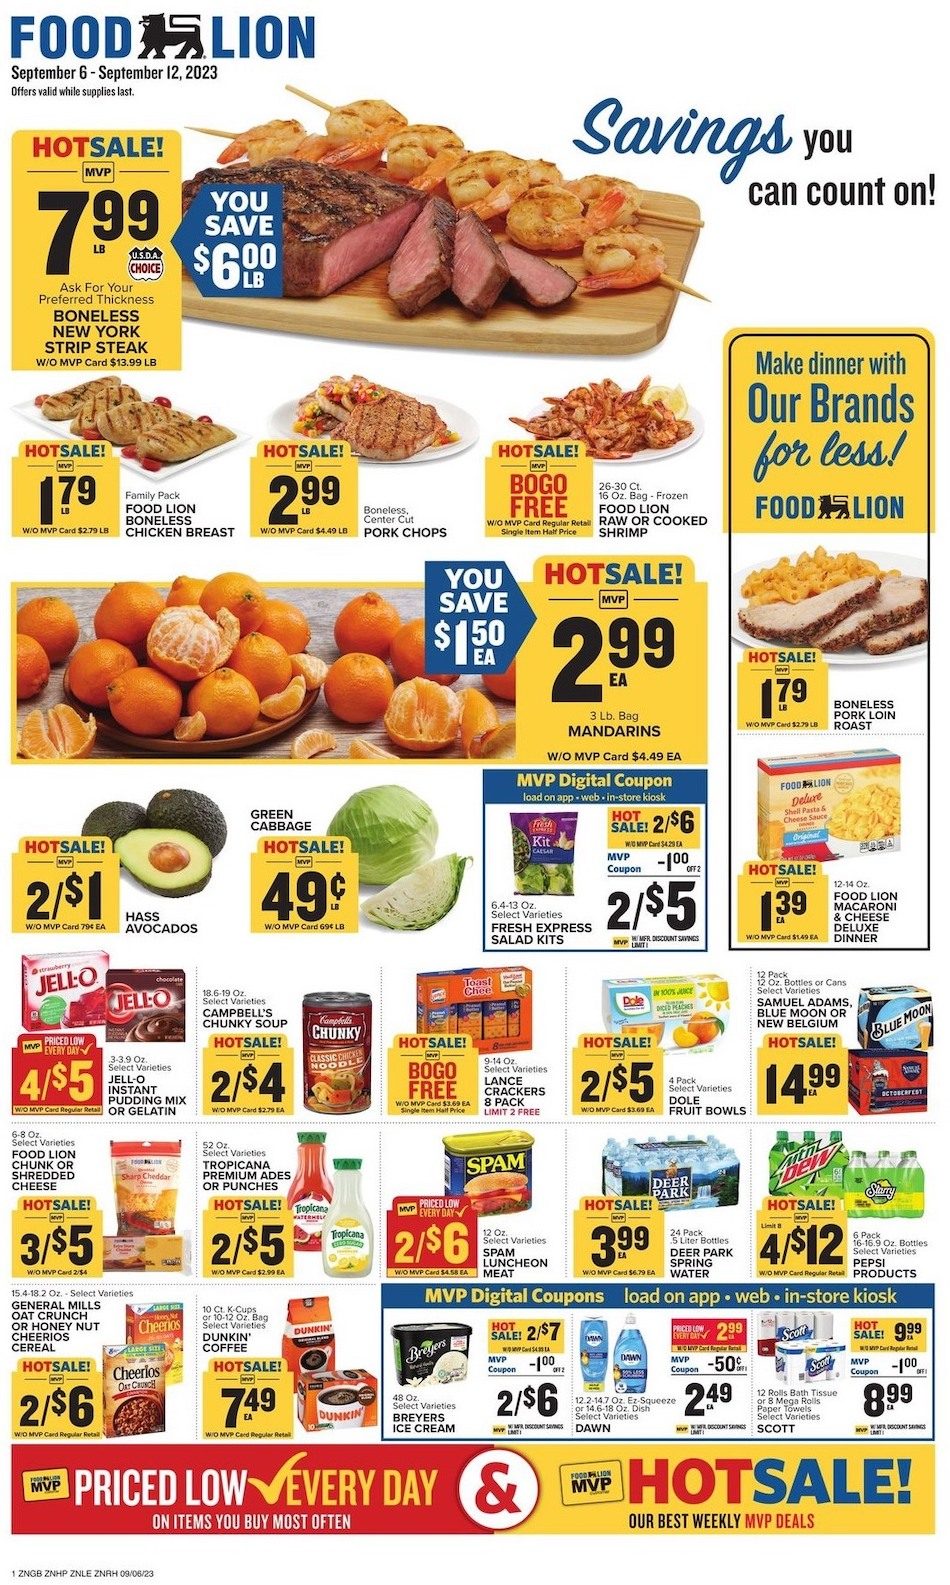 Food Lion Weekly Ad 6th – 12th September 2023 Page 1